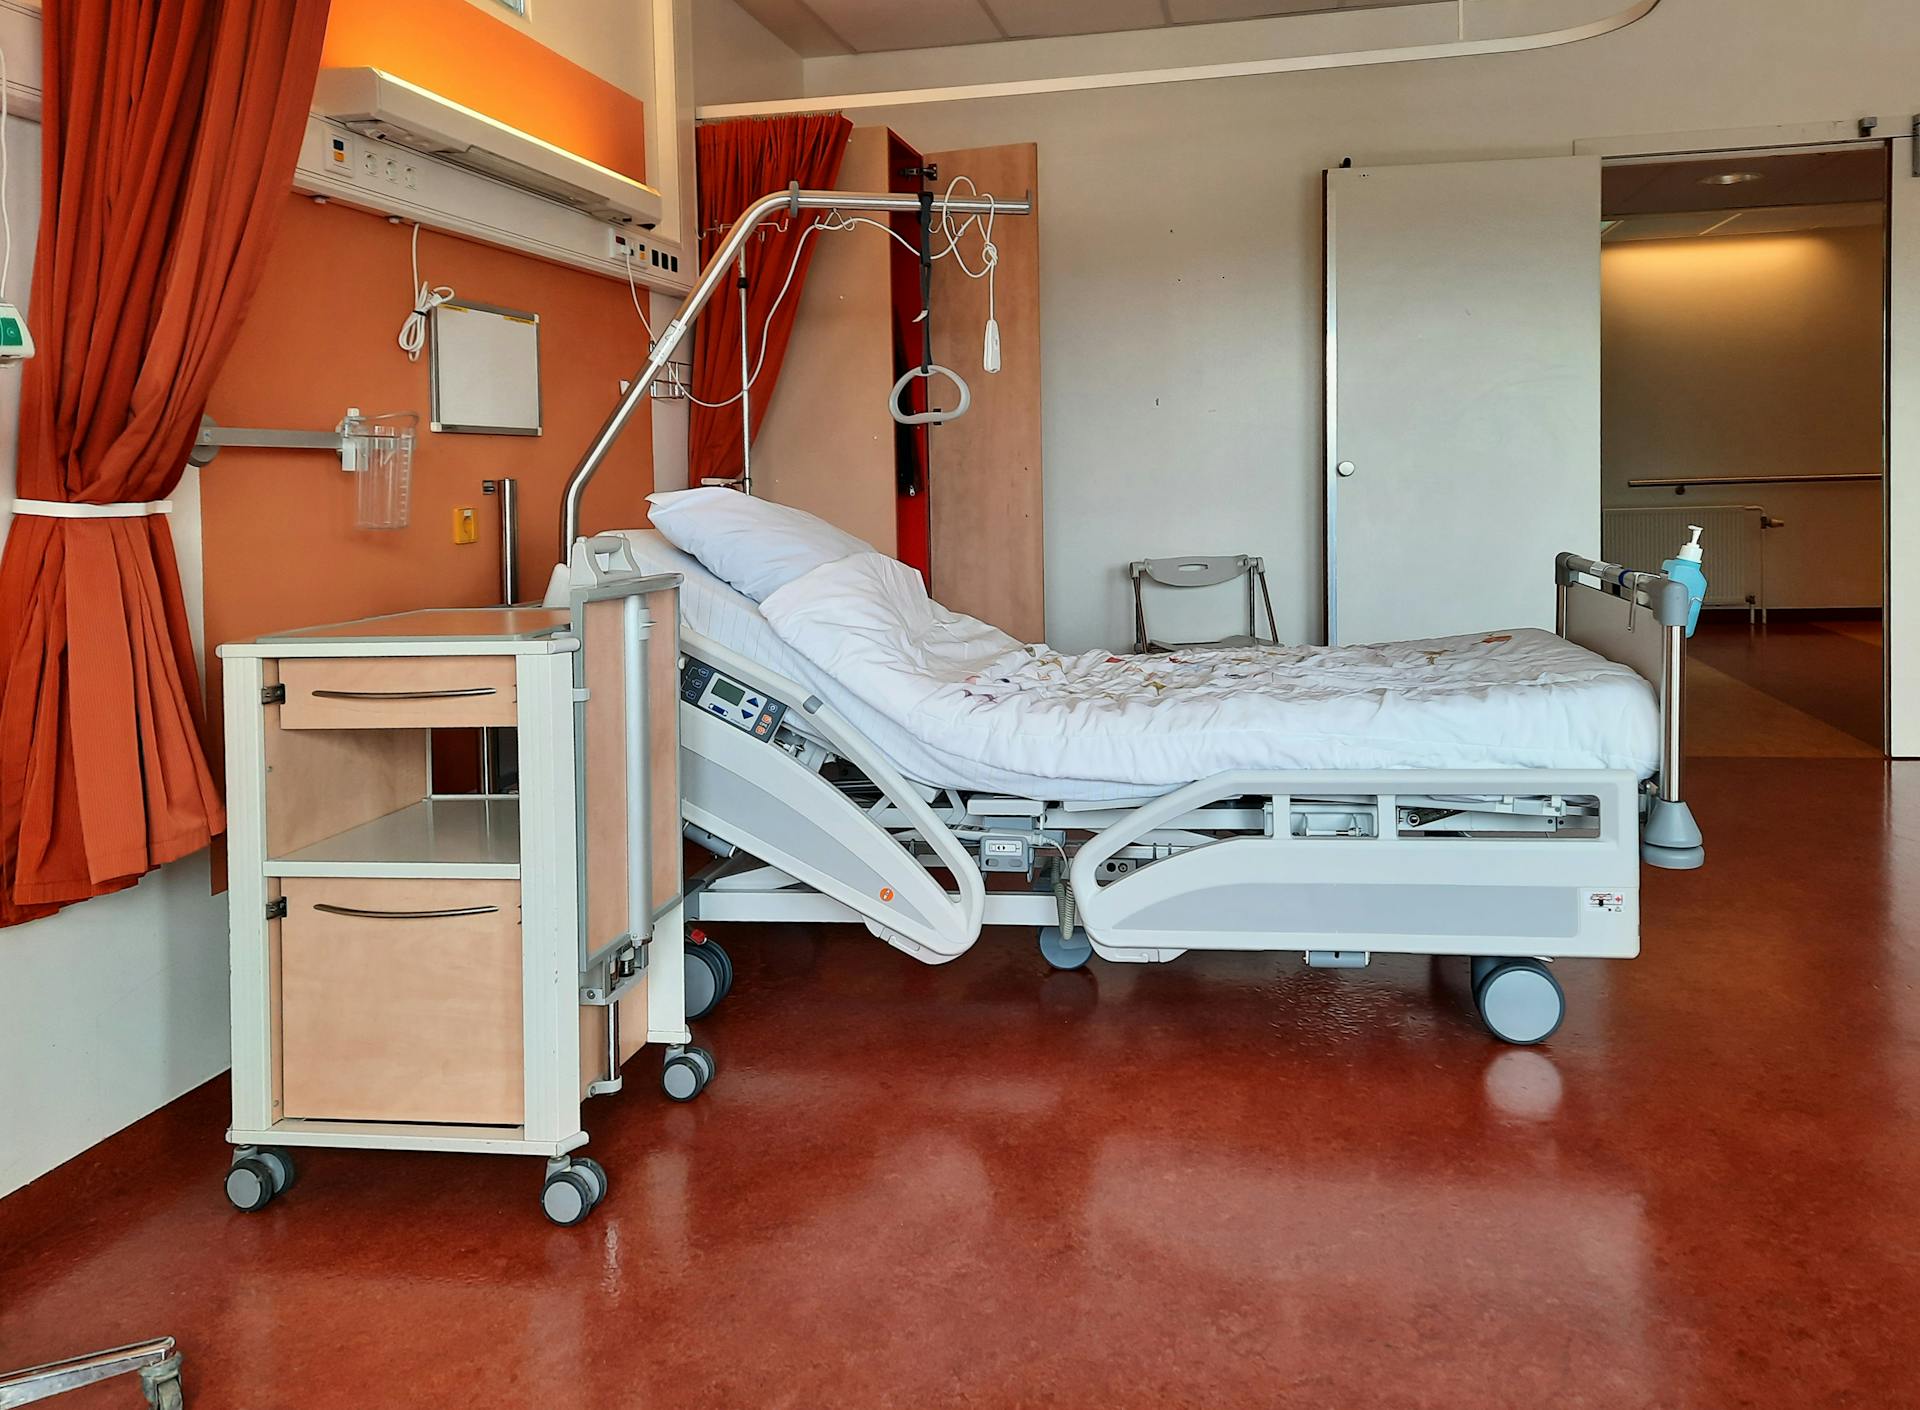 An empty hospital bed | Source: Pexels